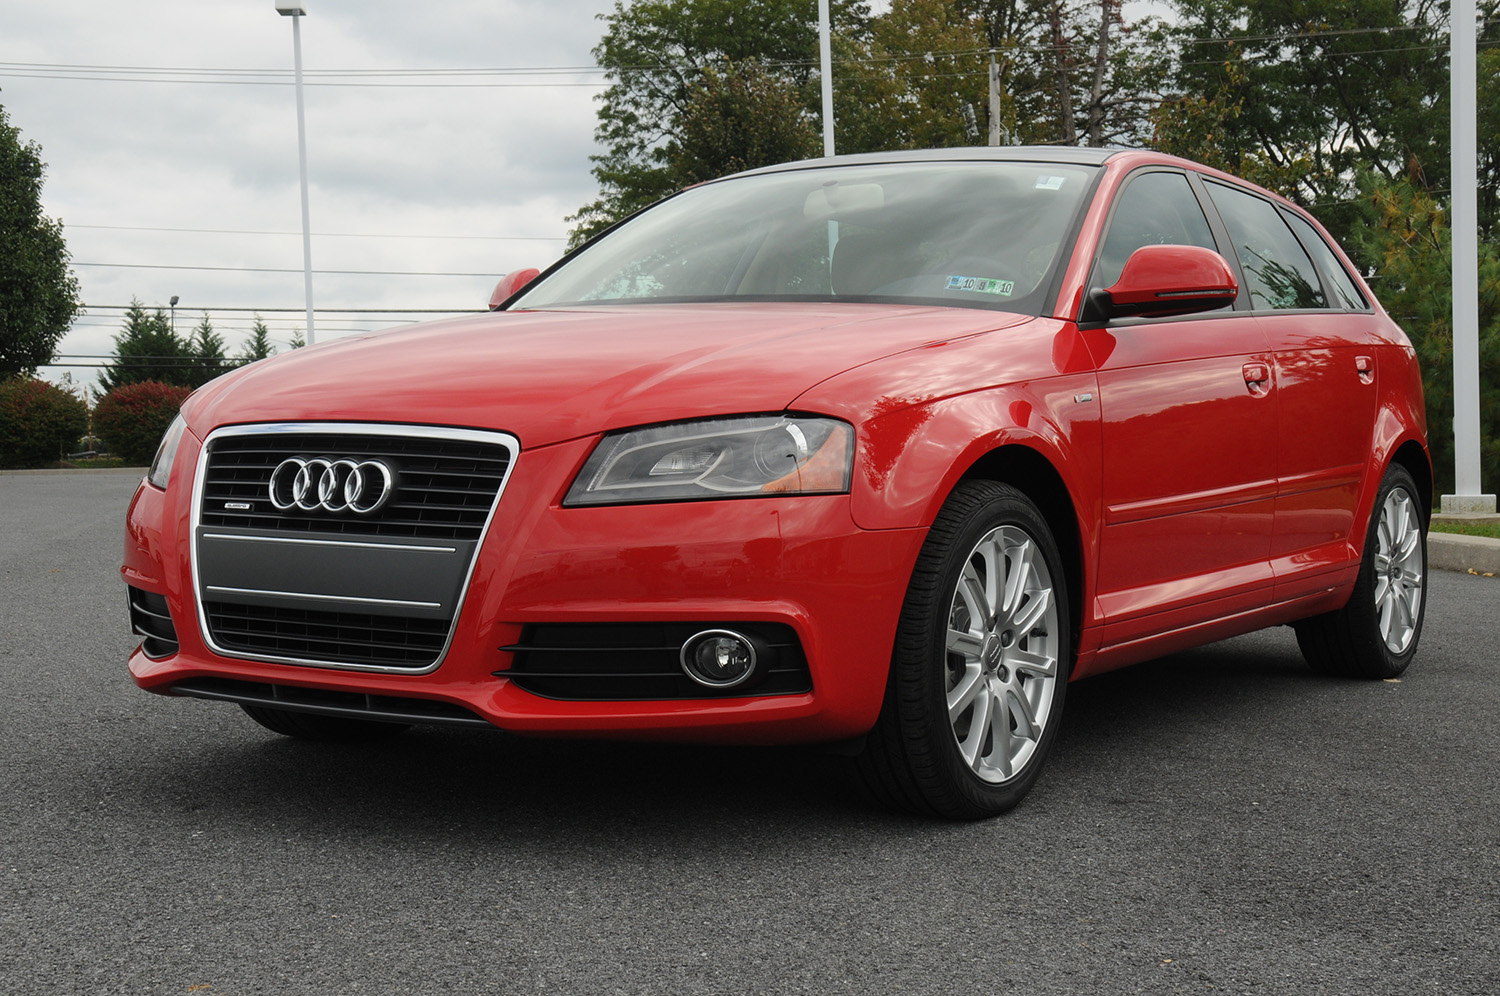 Front 3/4 of Red Audi A3 Luxury hatchback from 2009